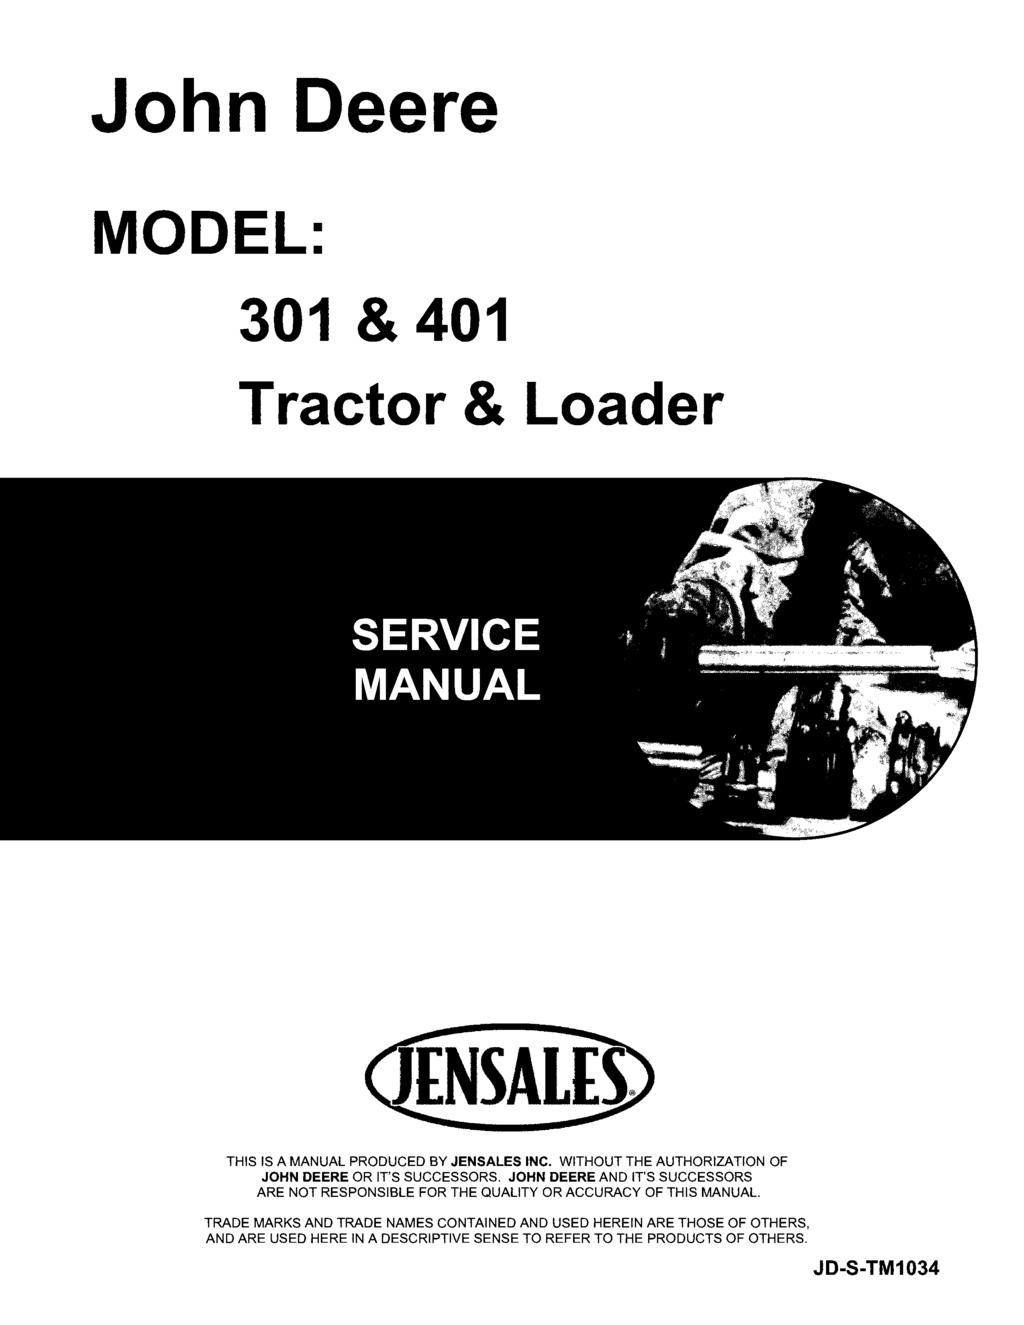 John Deere MODEL: 301 & 401 Tractor & Loader THIS IS A MANUAL PRODUCED BY JENSALES INC. WITHOUT THE AUTHORIZATION OF JOHN DEERE OR IT'S SUCCESSORS.